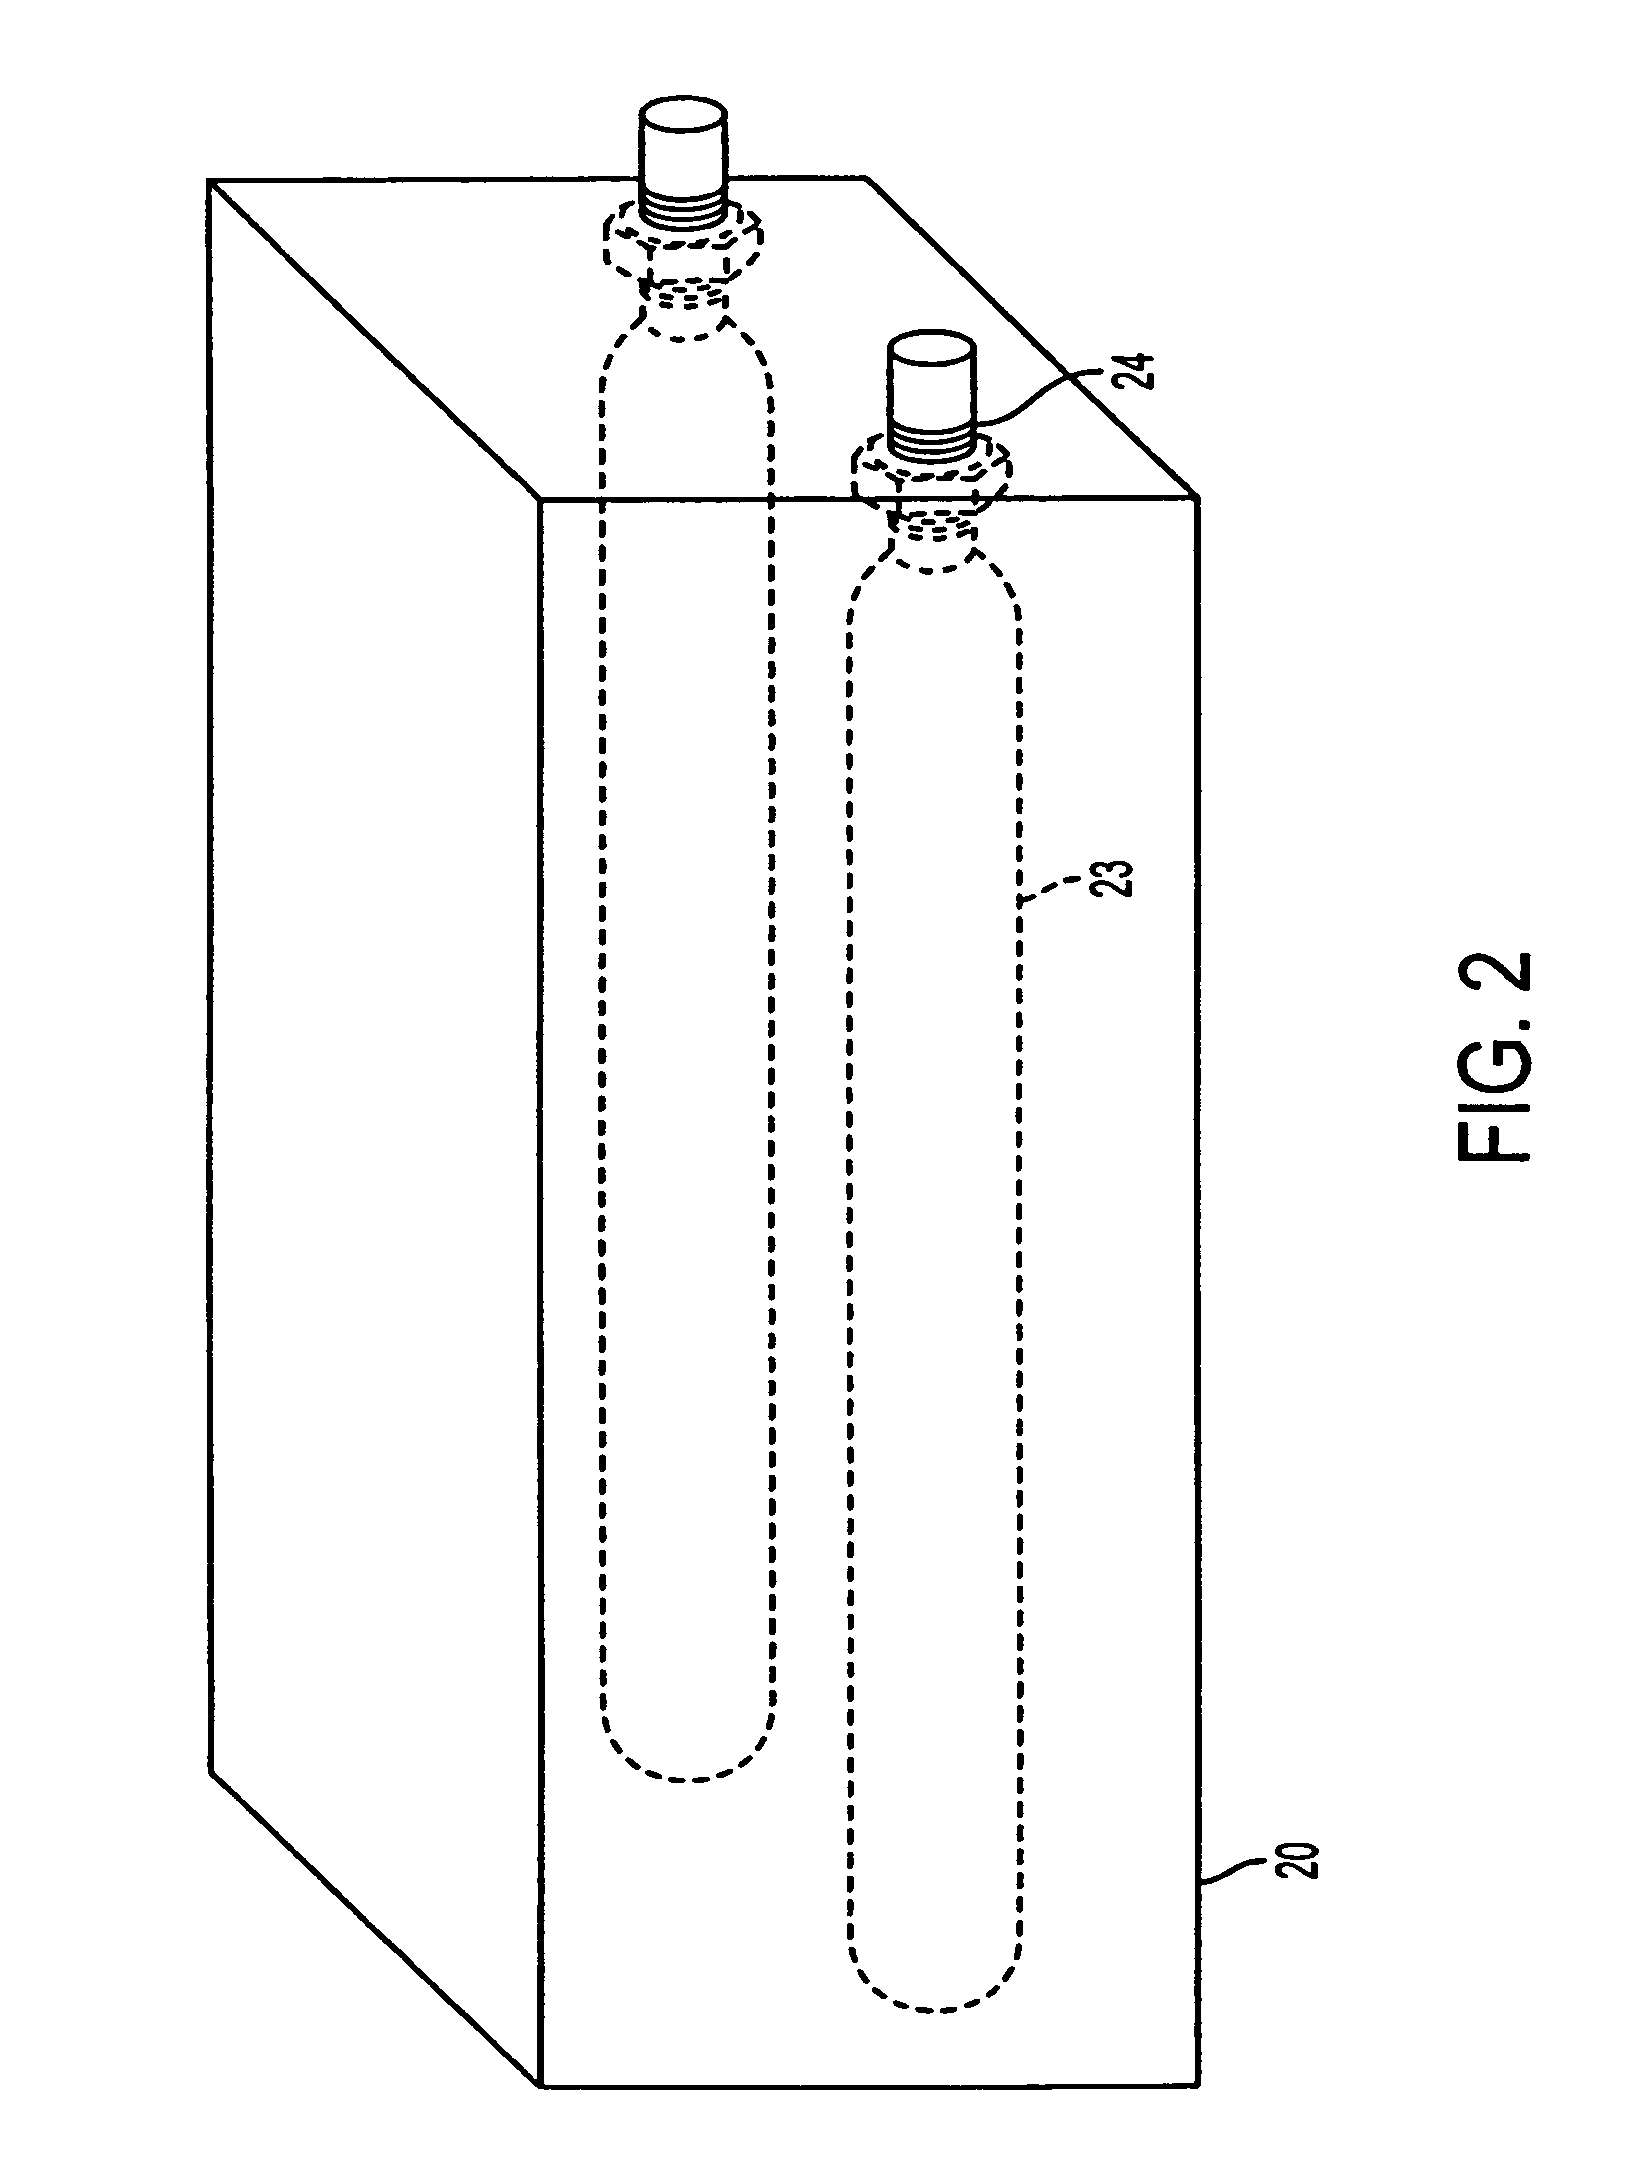 Apparatus and method for producing chlorine dioxide